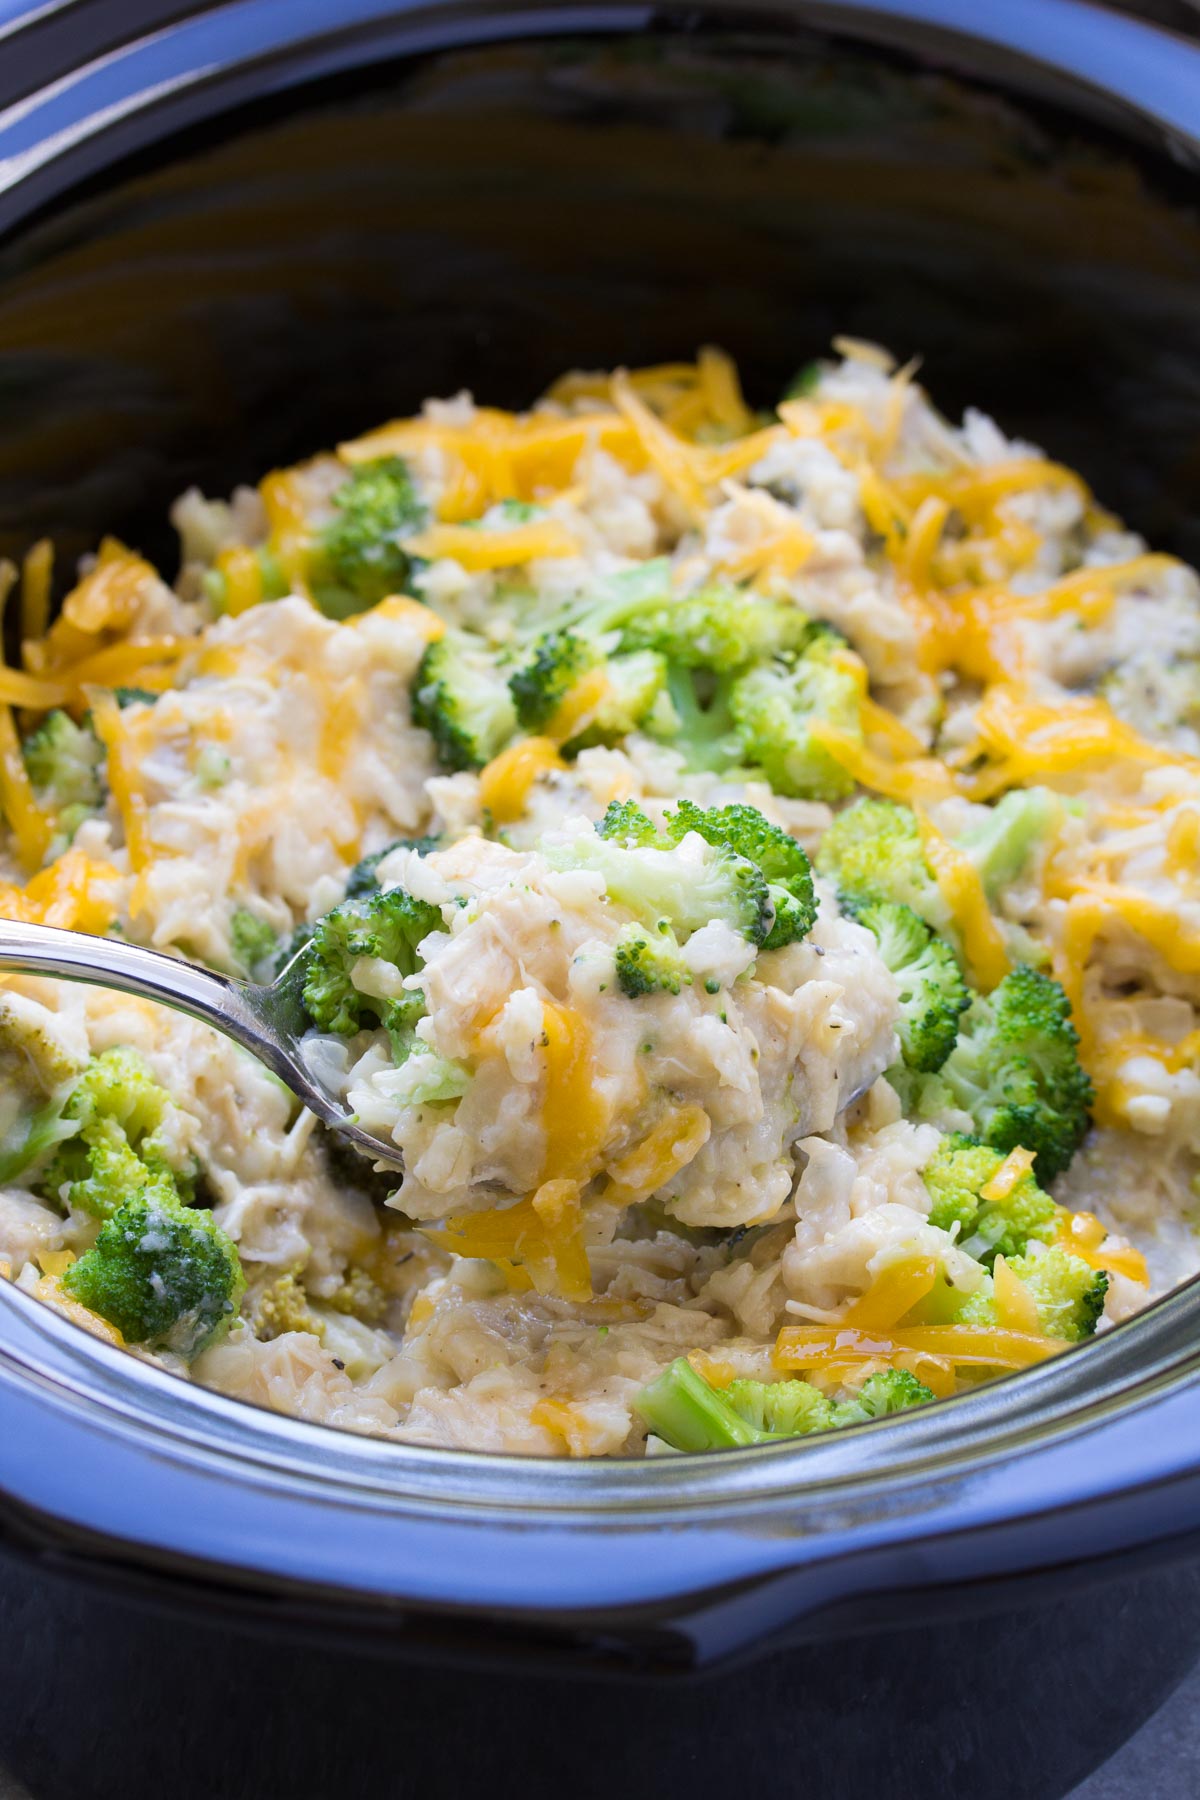 Chicken broccoli rice casserole in slow cooker with serving spoon.